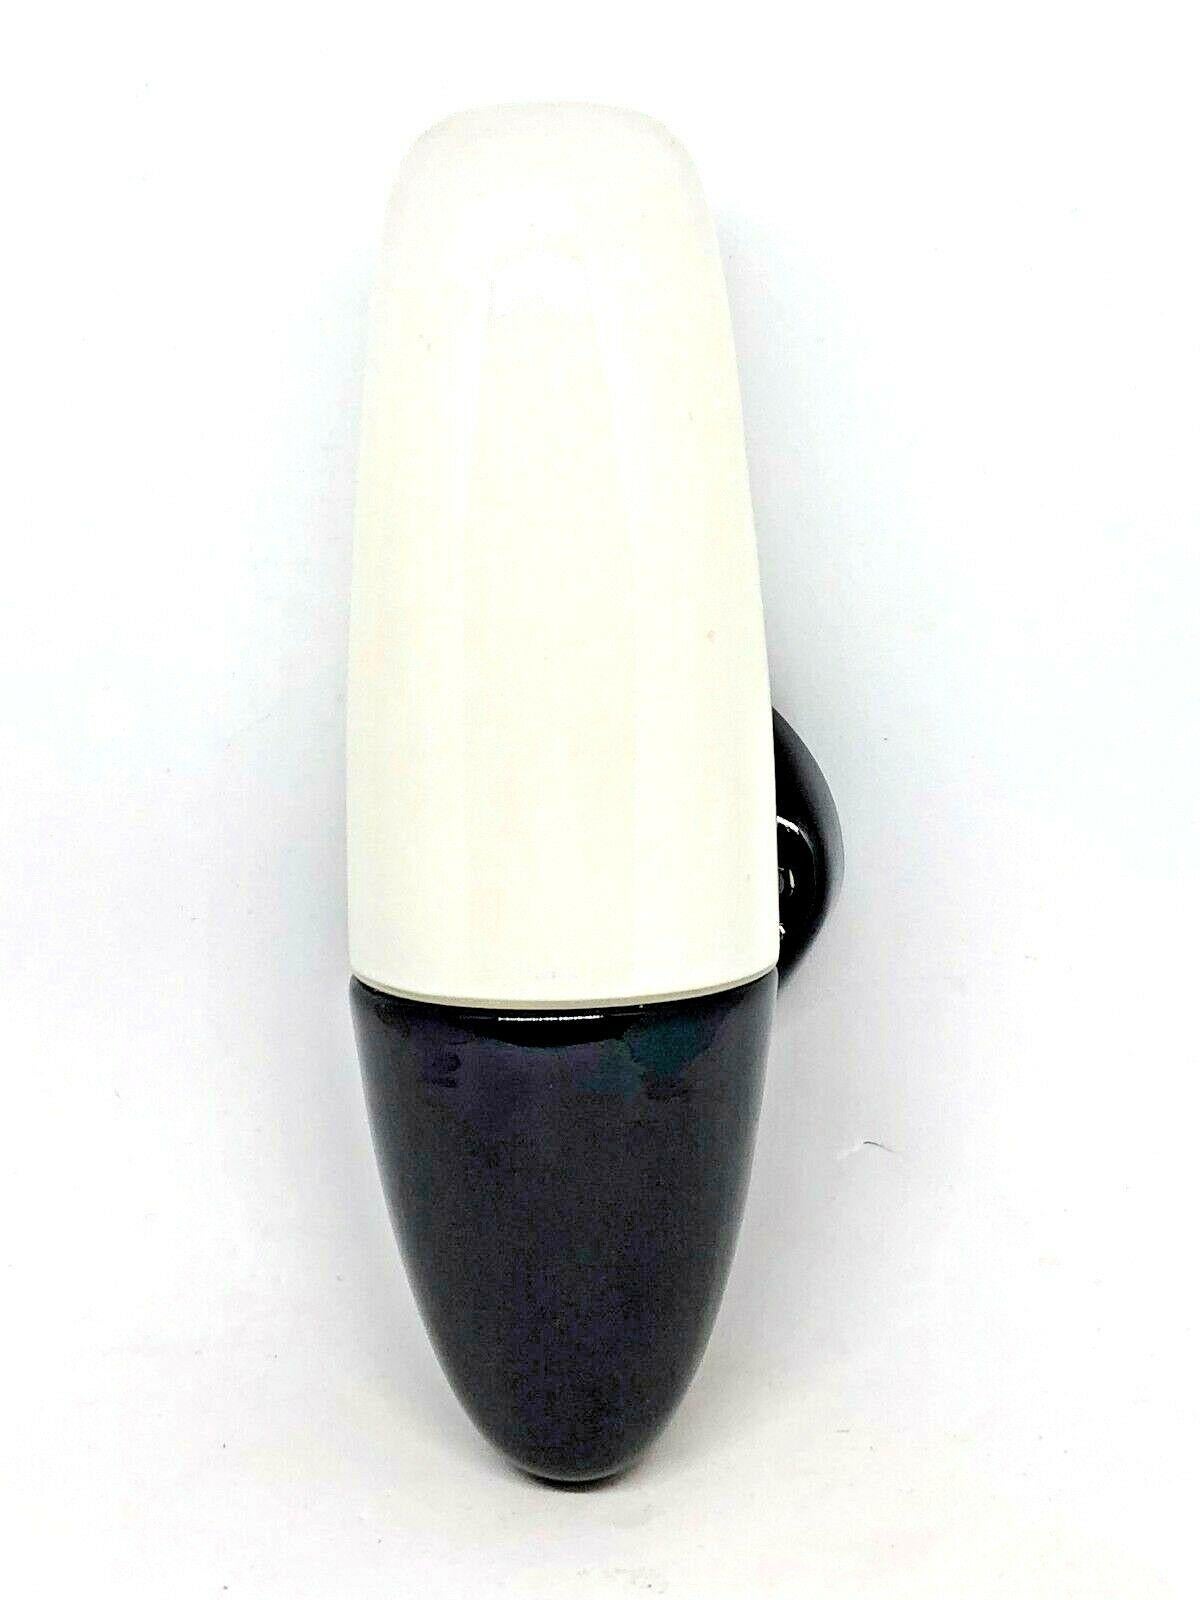 Bauhaus Wagenfeld Black and White Wall Sconce, Germany, 1950s For Sale 6